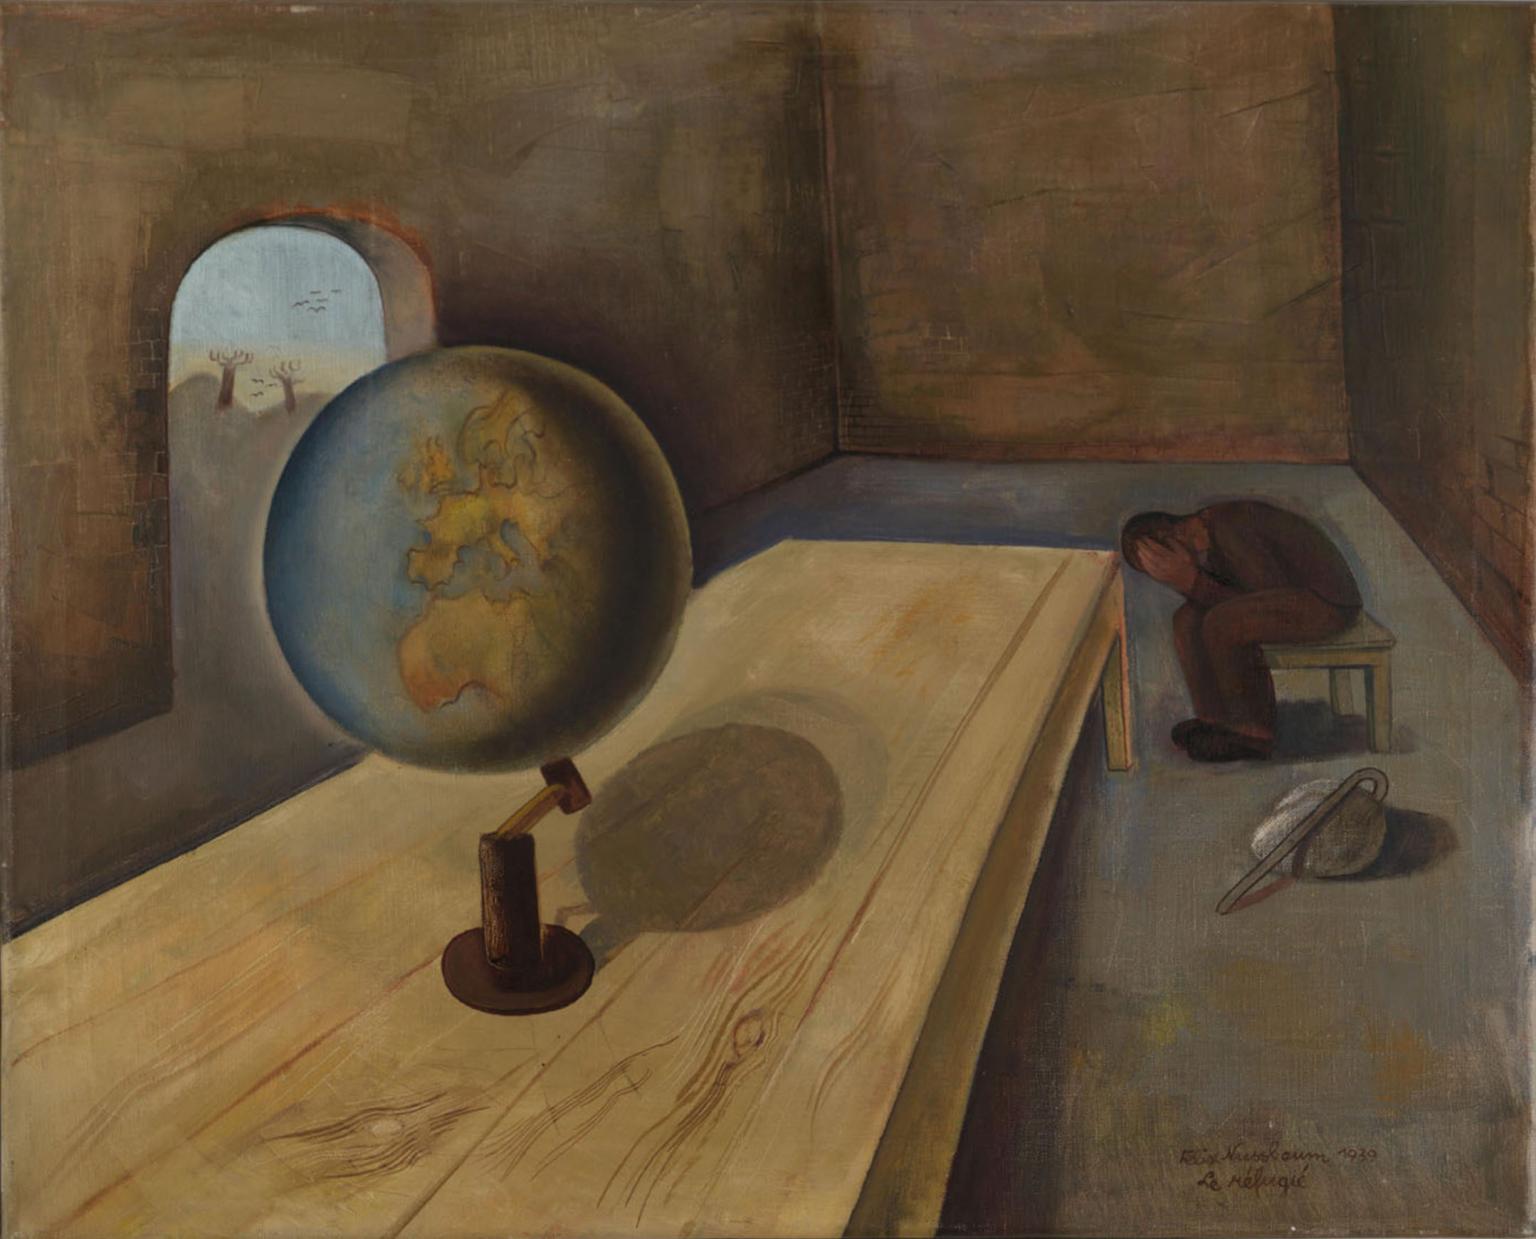 Painting of table displaying a large globe in foreground, as a man sits slumped in a chair with his head in hands in background.